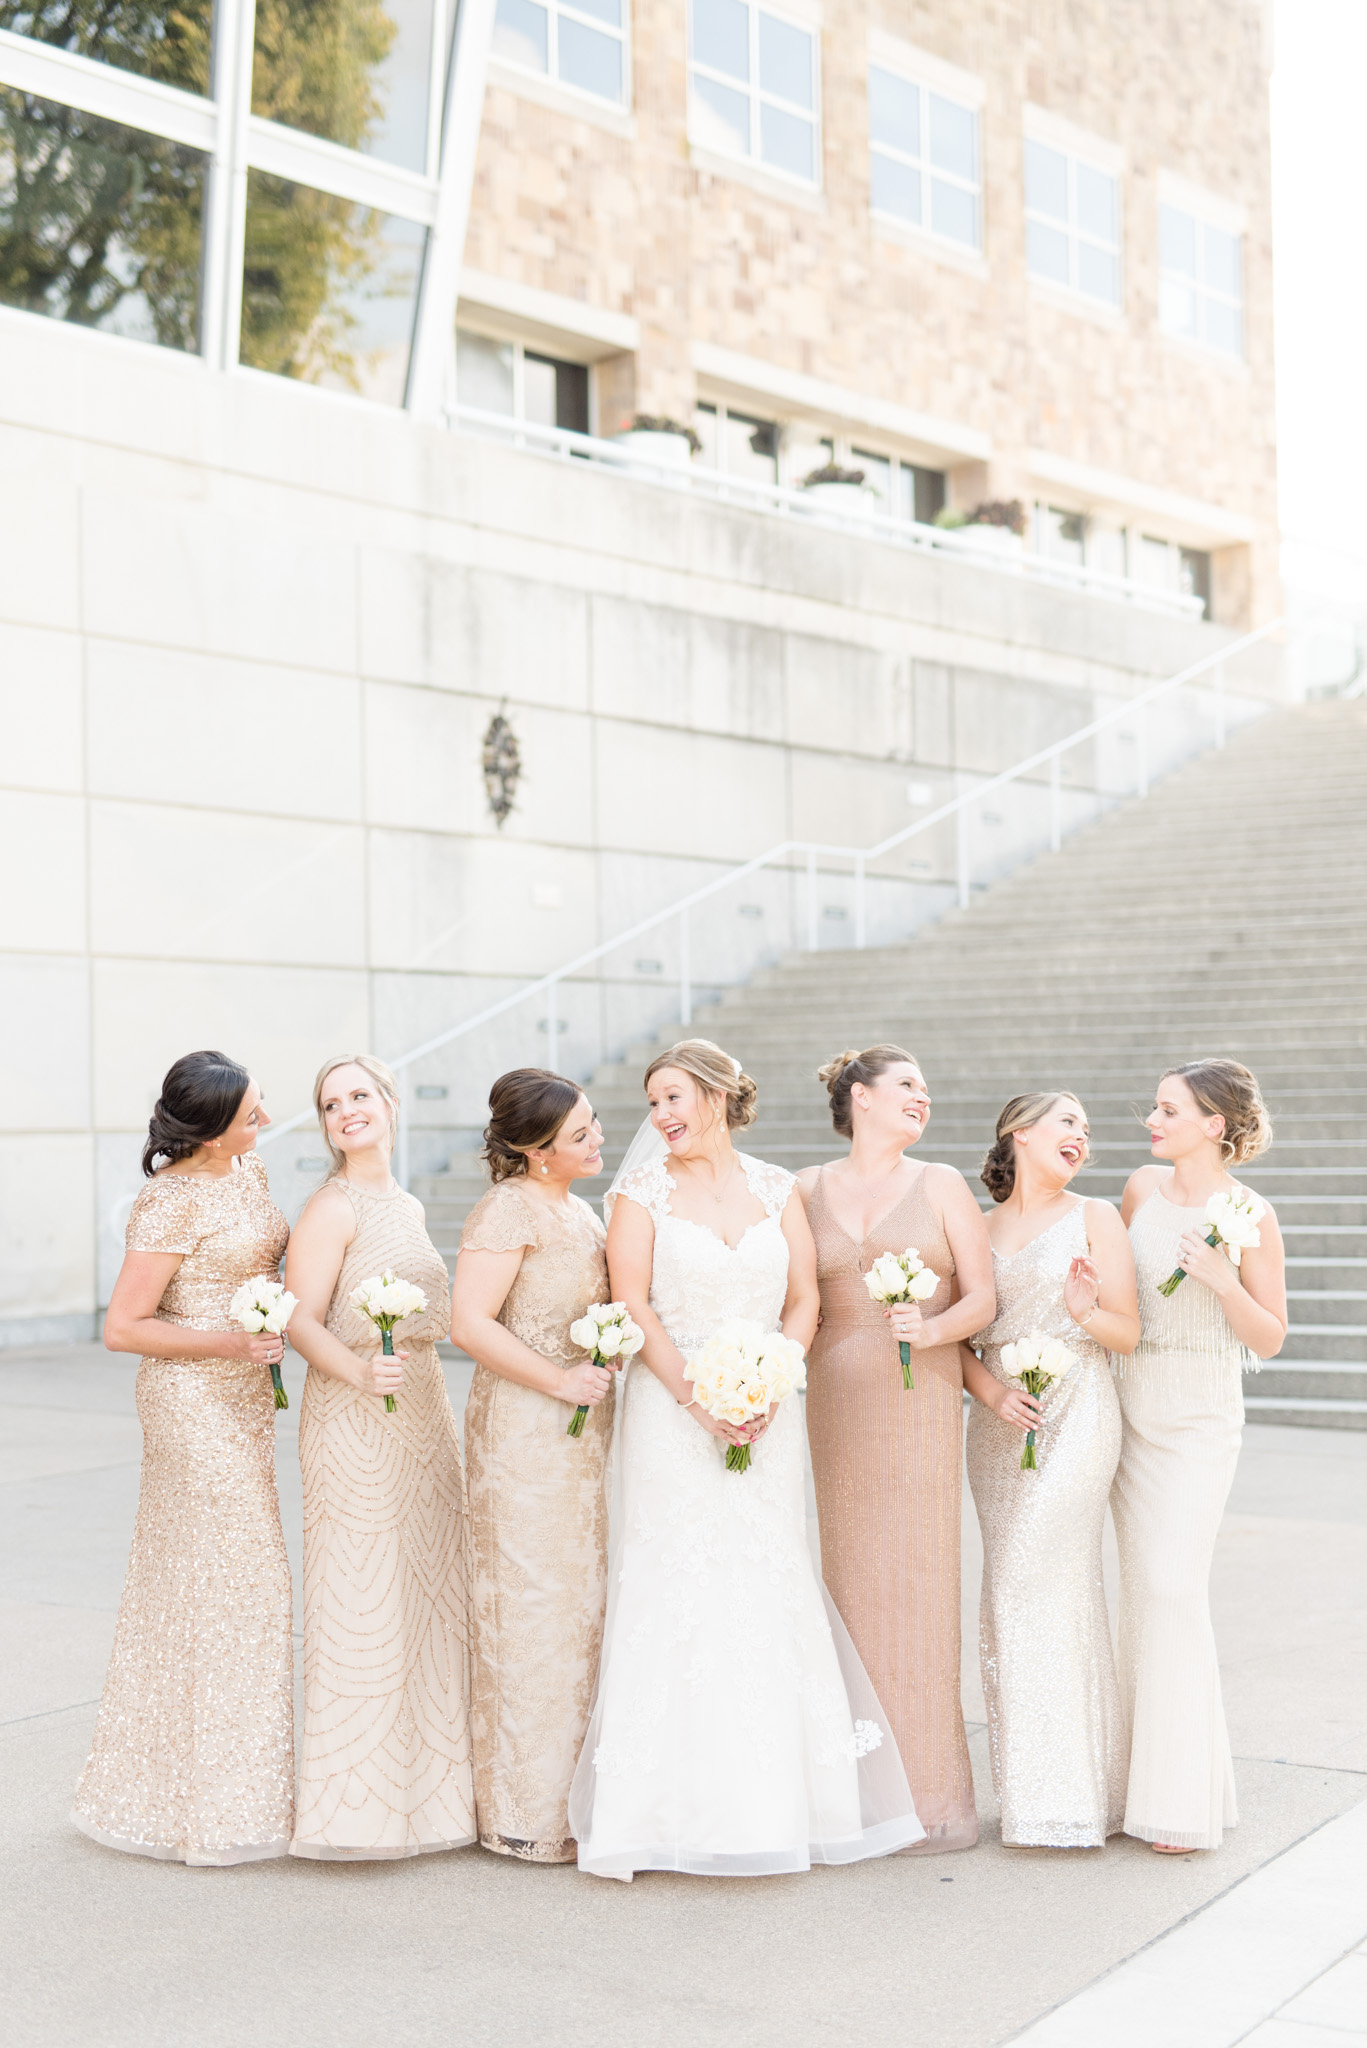 Bride and bridesmaids smile at each other downtown.